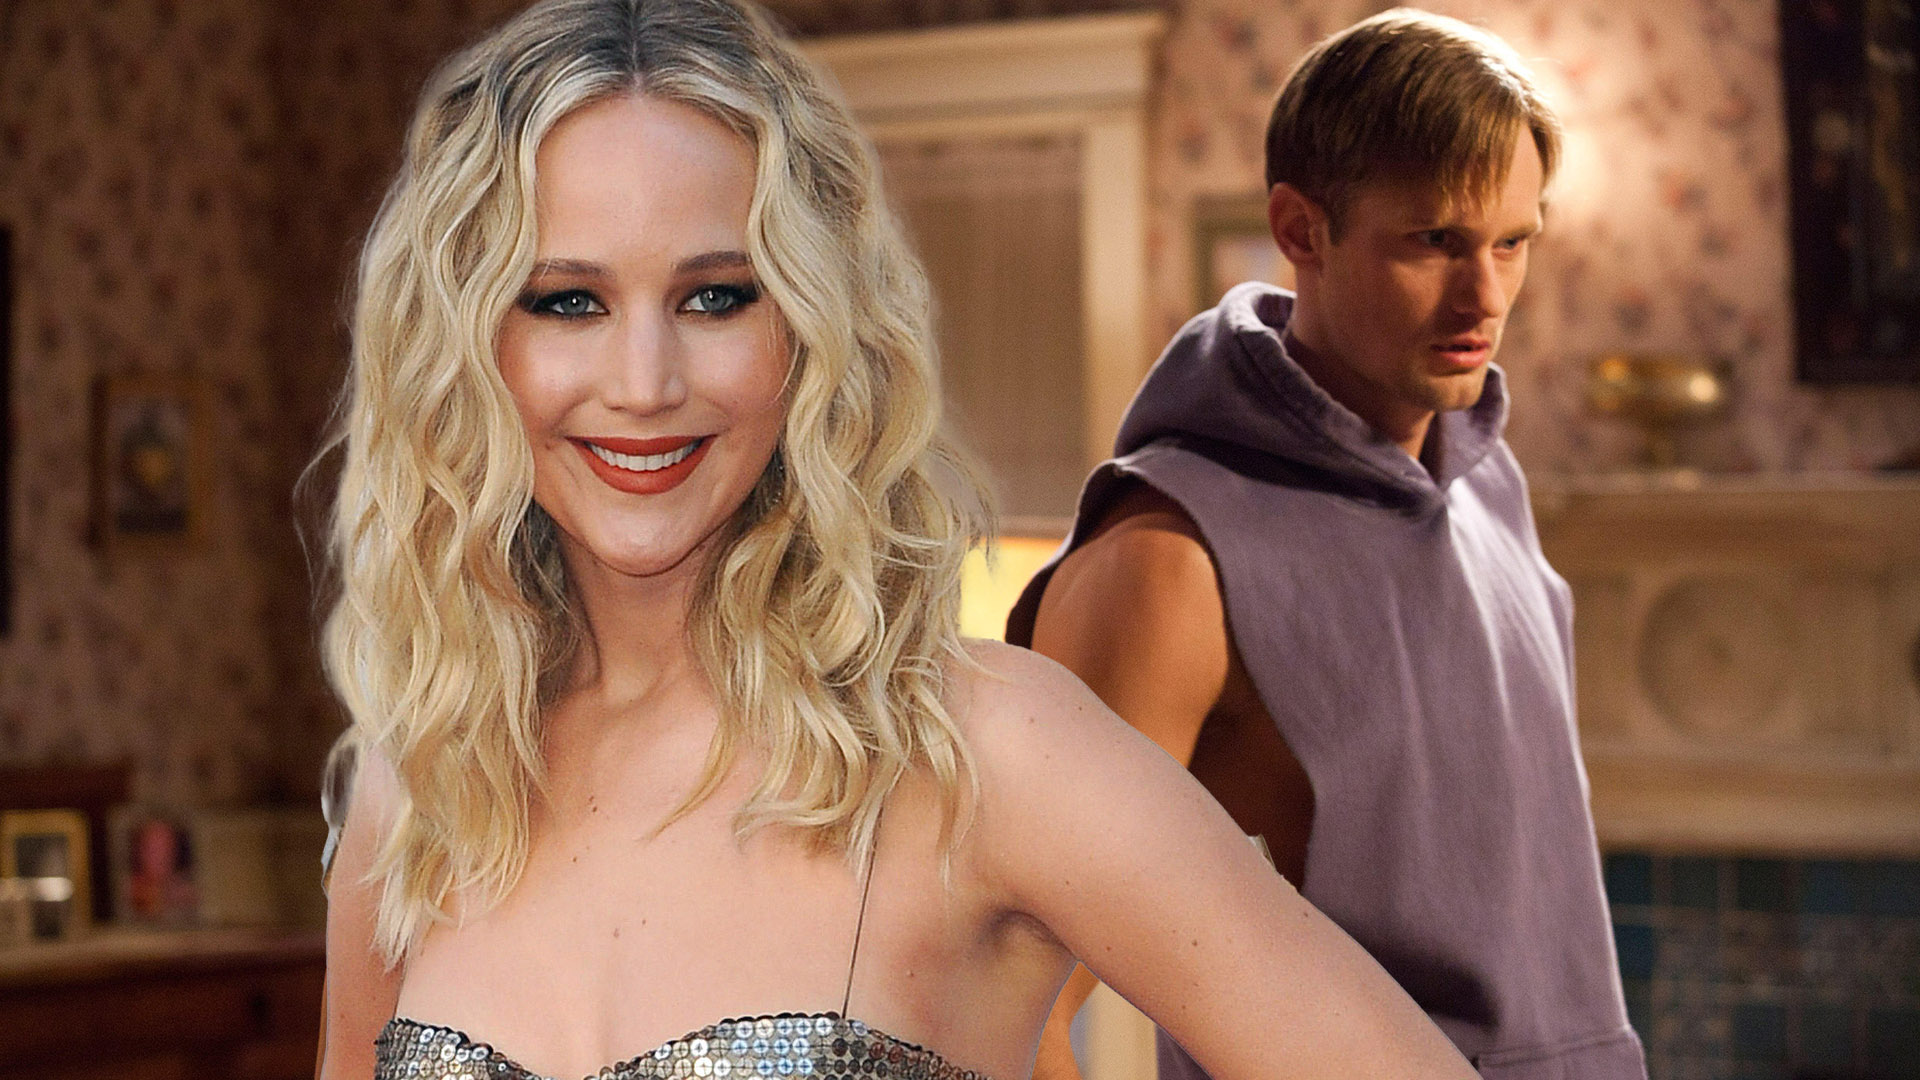 Jennifer Lawrence Was Refused a Role in True Blood Cause She'd Make It Even Weirder